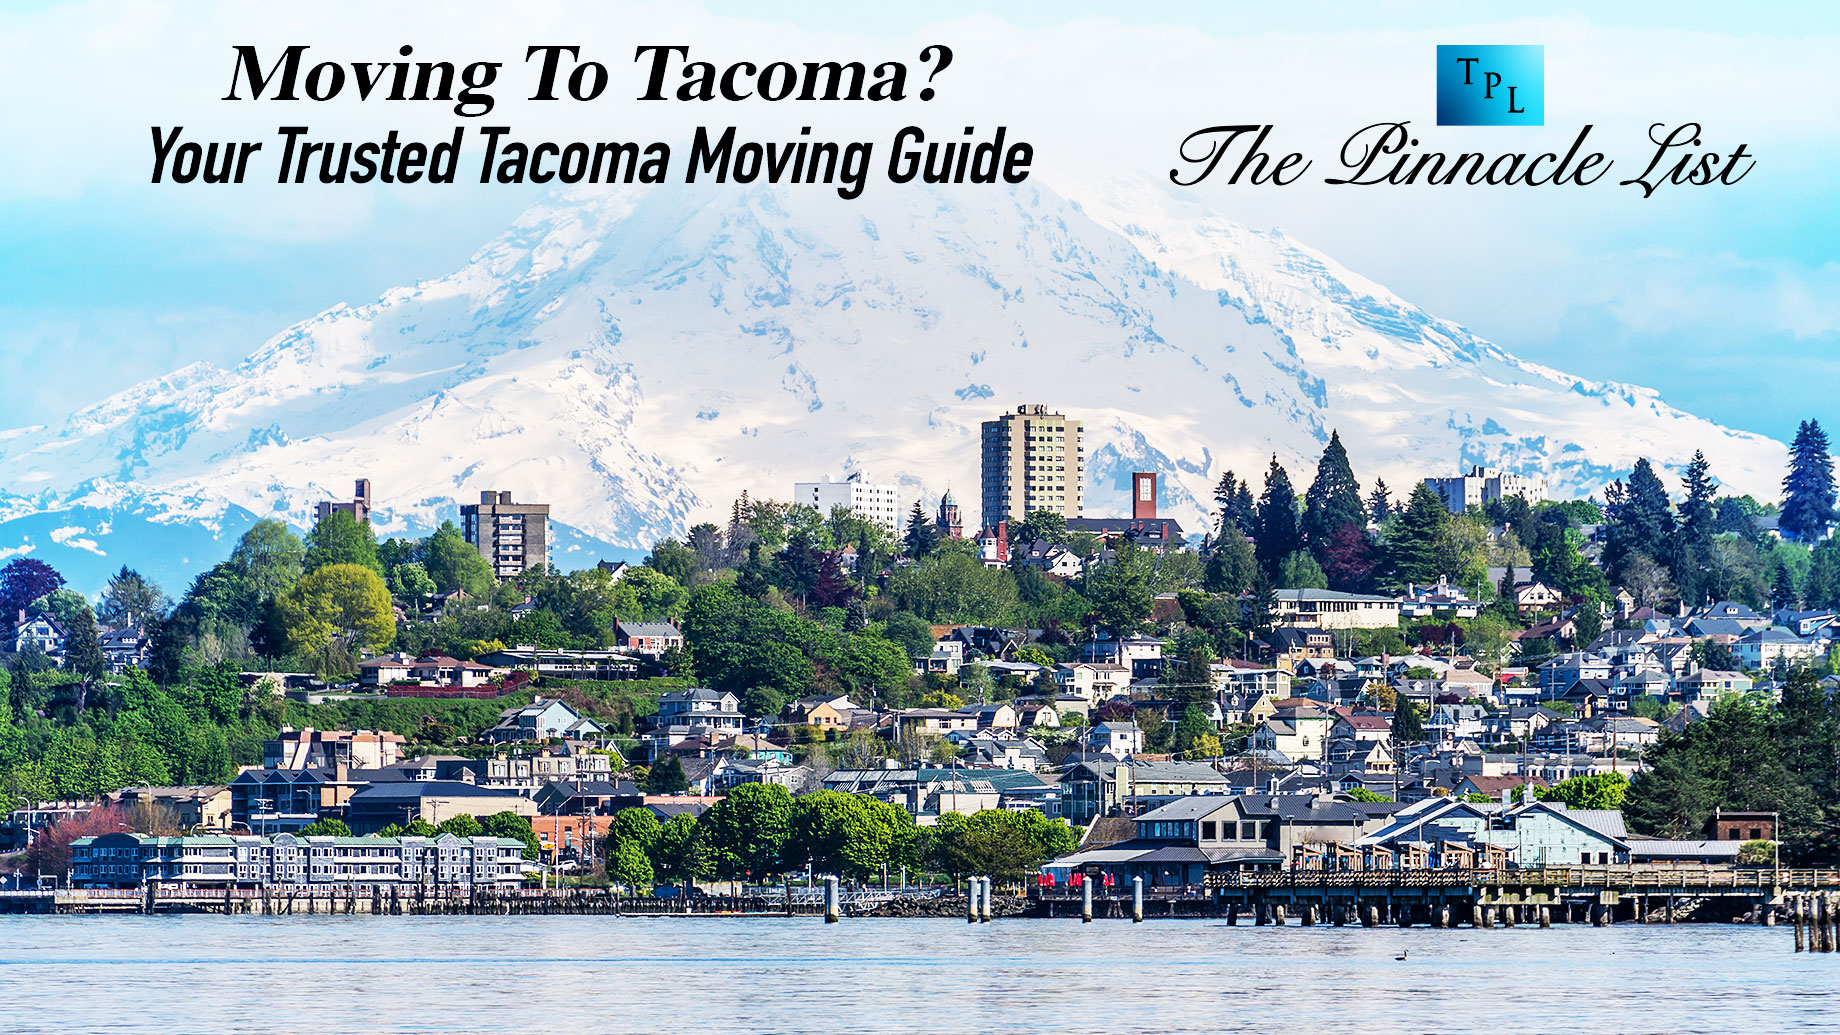 Moving To Tacoma? Your Trusted Tacoma Moving Guide